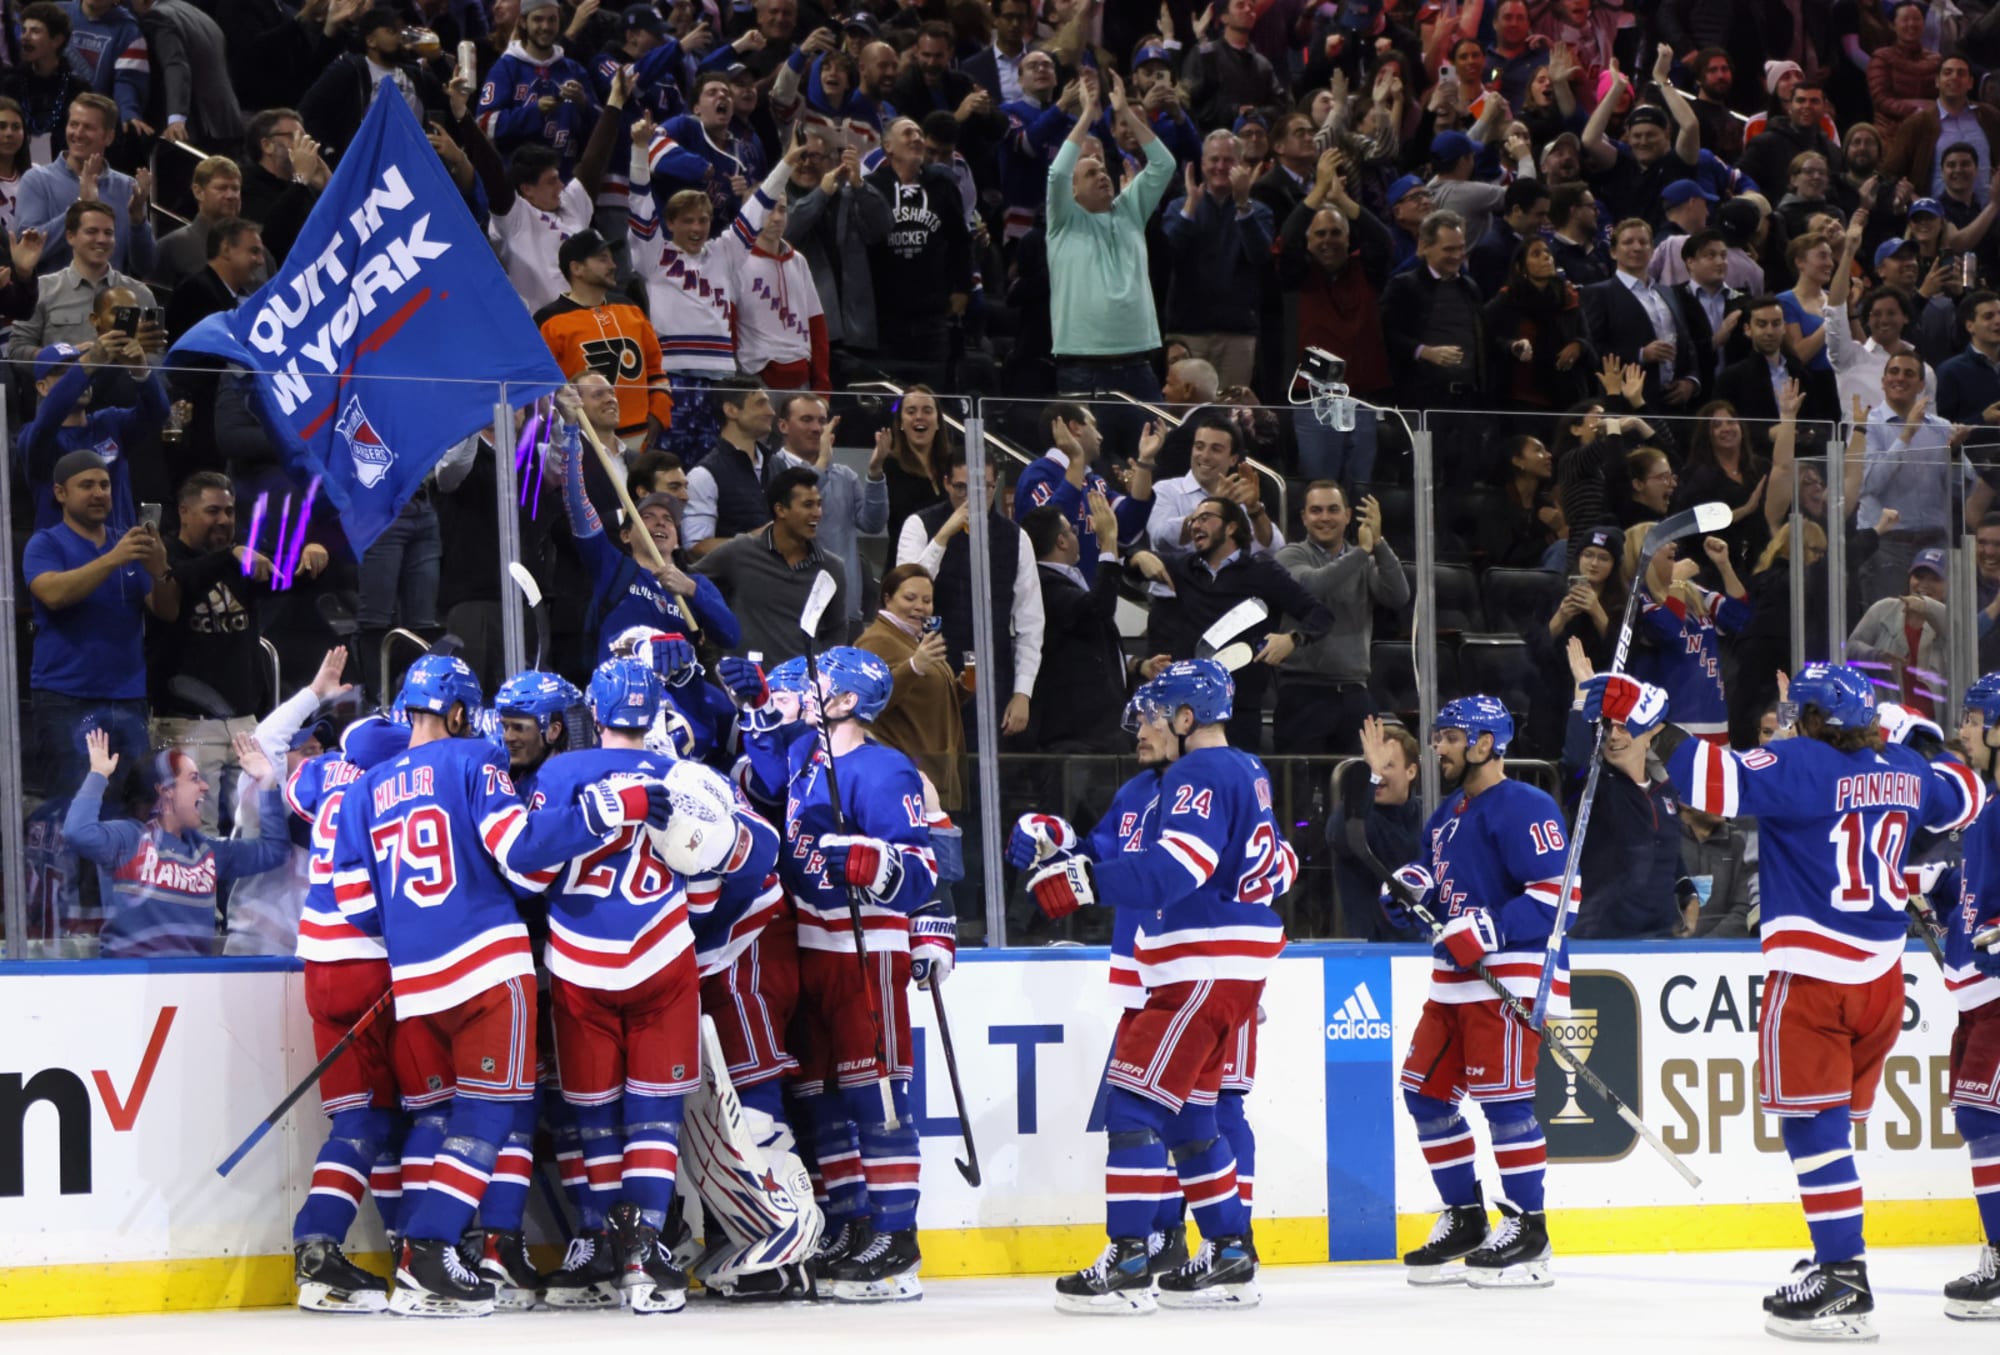 Giving Thanks: Rangers have a lot to be thankful for despite rough start